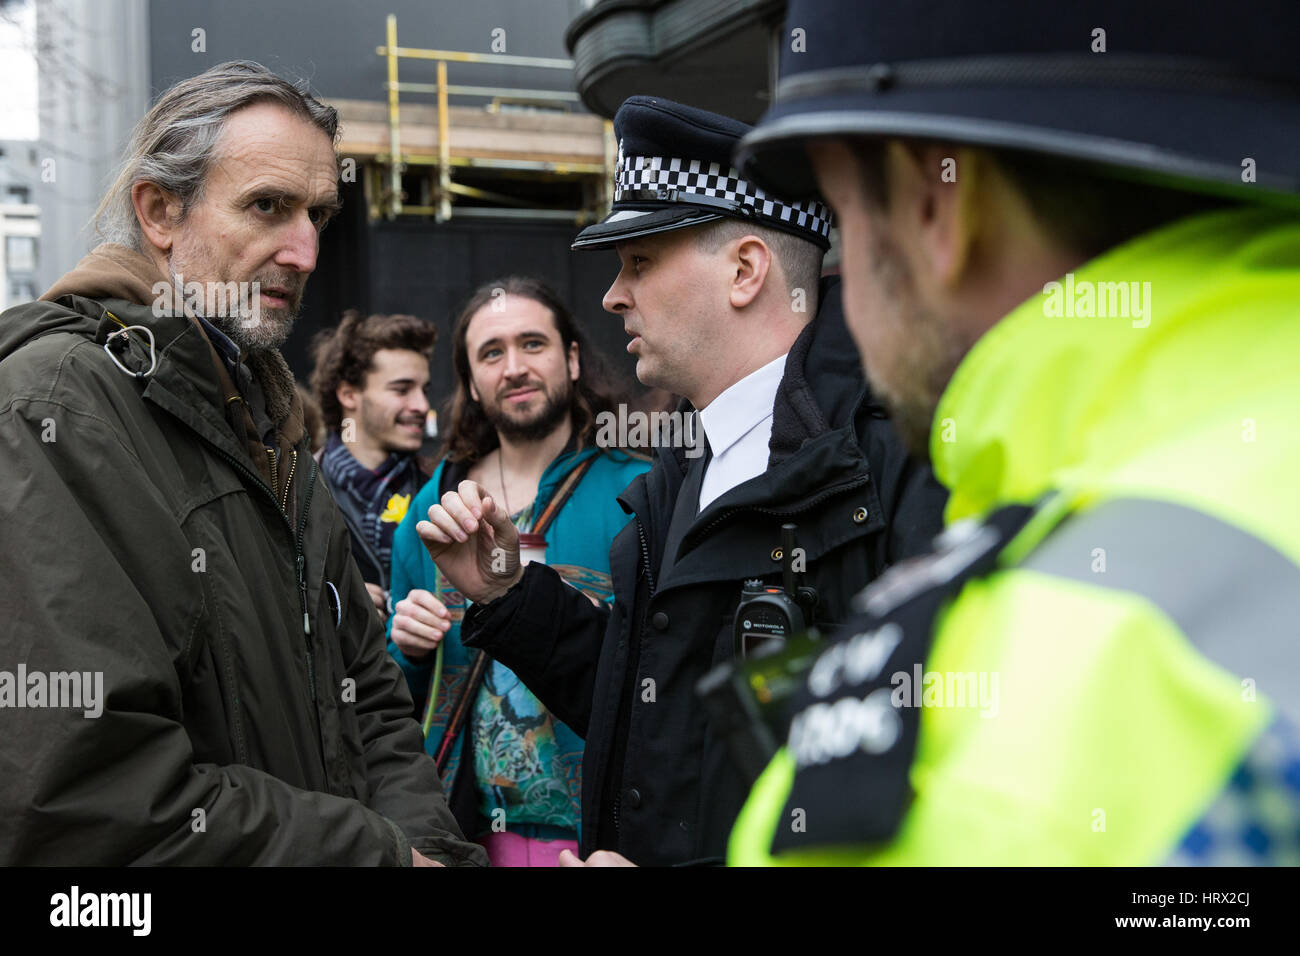 London, UK. 4th March, 2017. A police officer speaks to activist Roger Hallam before an action by Rising Up and Kings College Climate Emergency to decorate Kings College London with flowers and signs as part of a protest demanding that KCL divest from fossil fuels, invest in renewables and cease the banning and suspension of students for political activities. Stock Photo